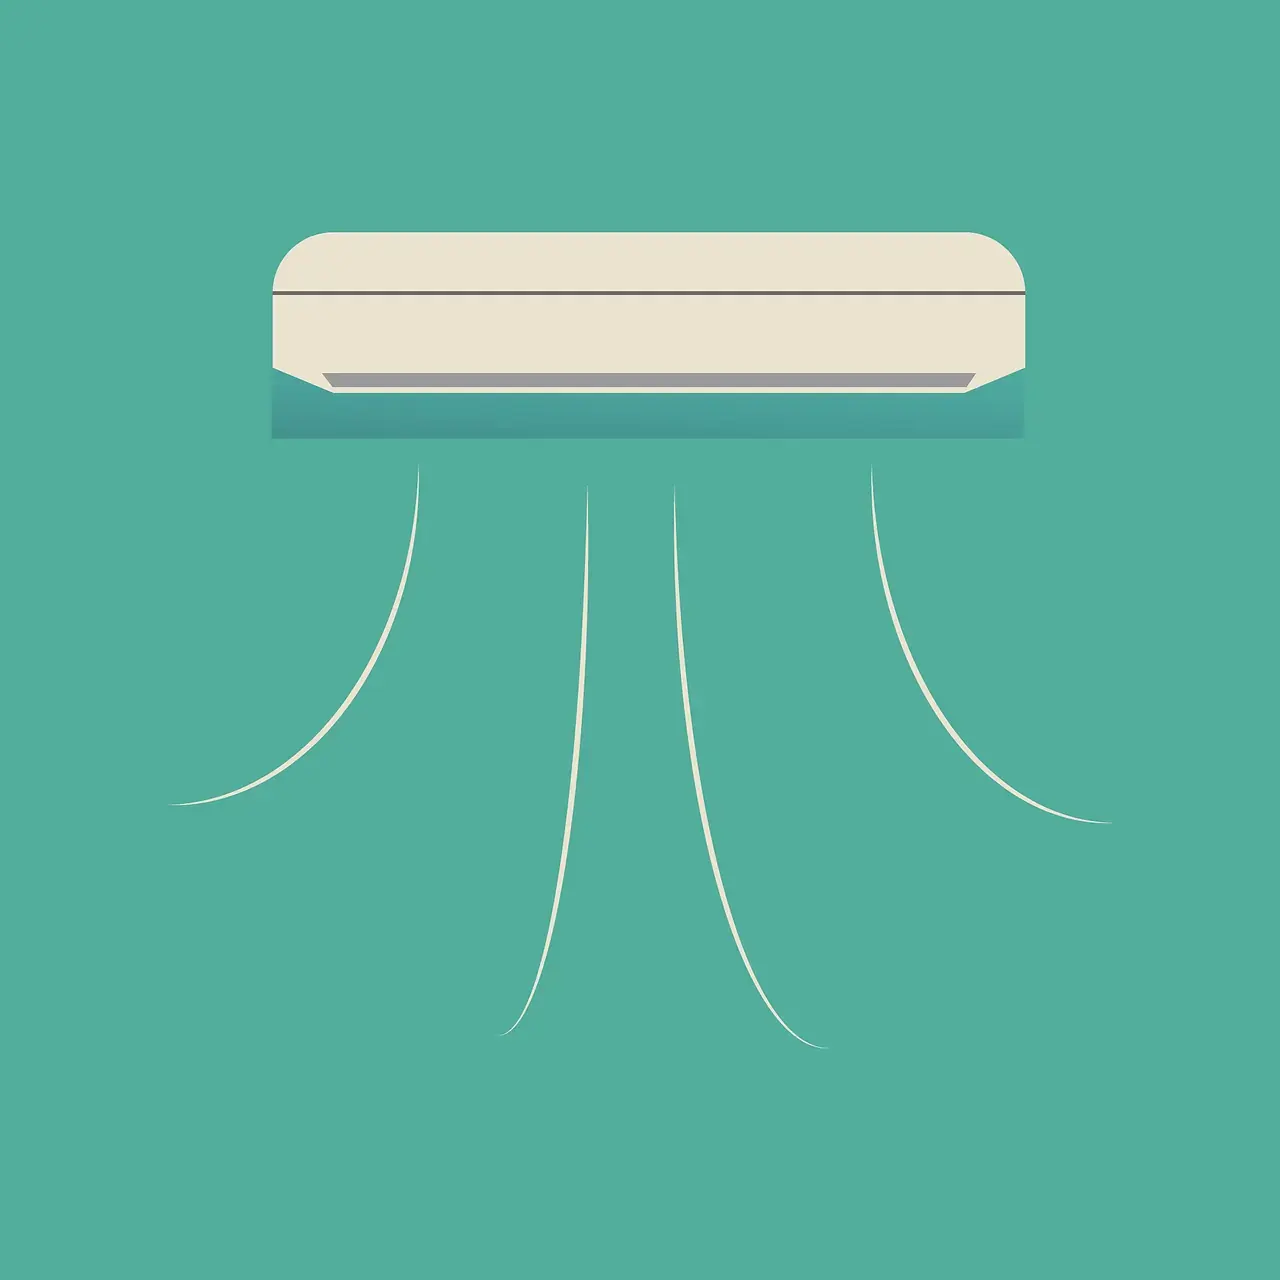 drawing of an air conditioner